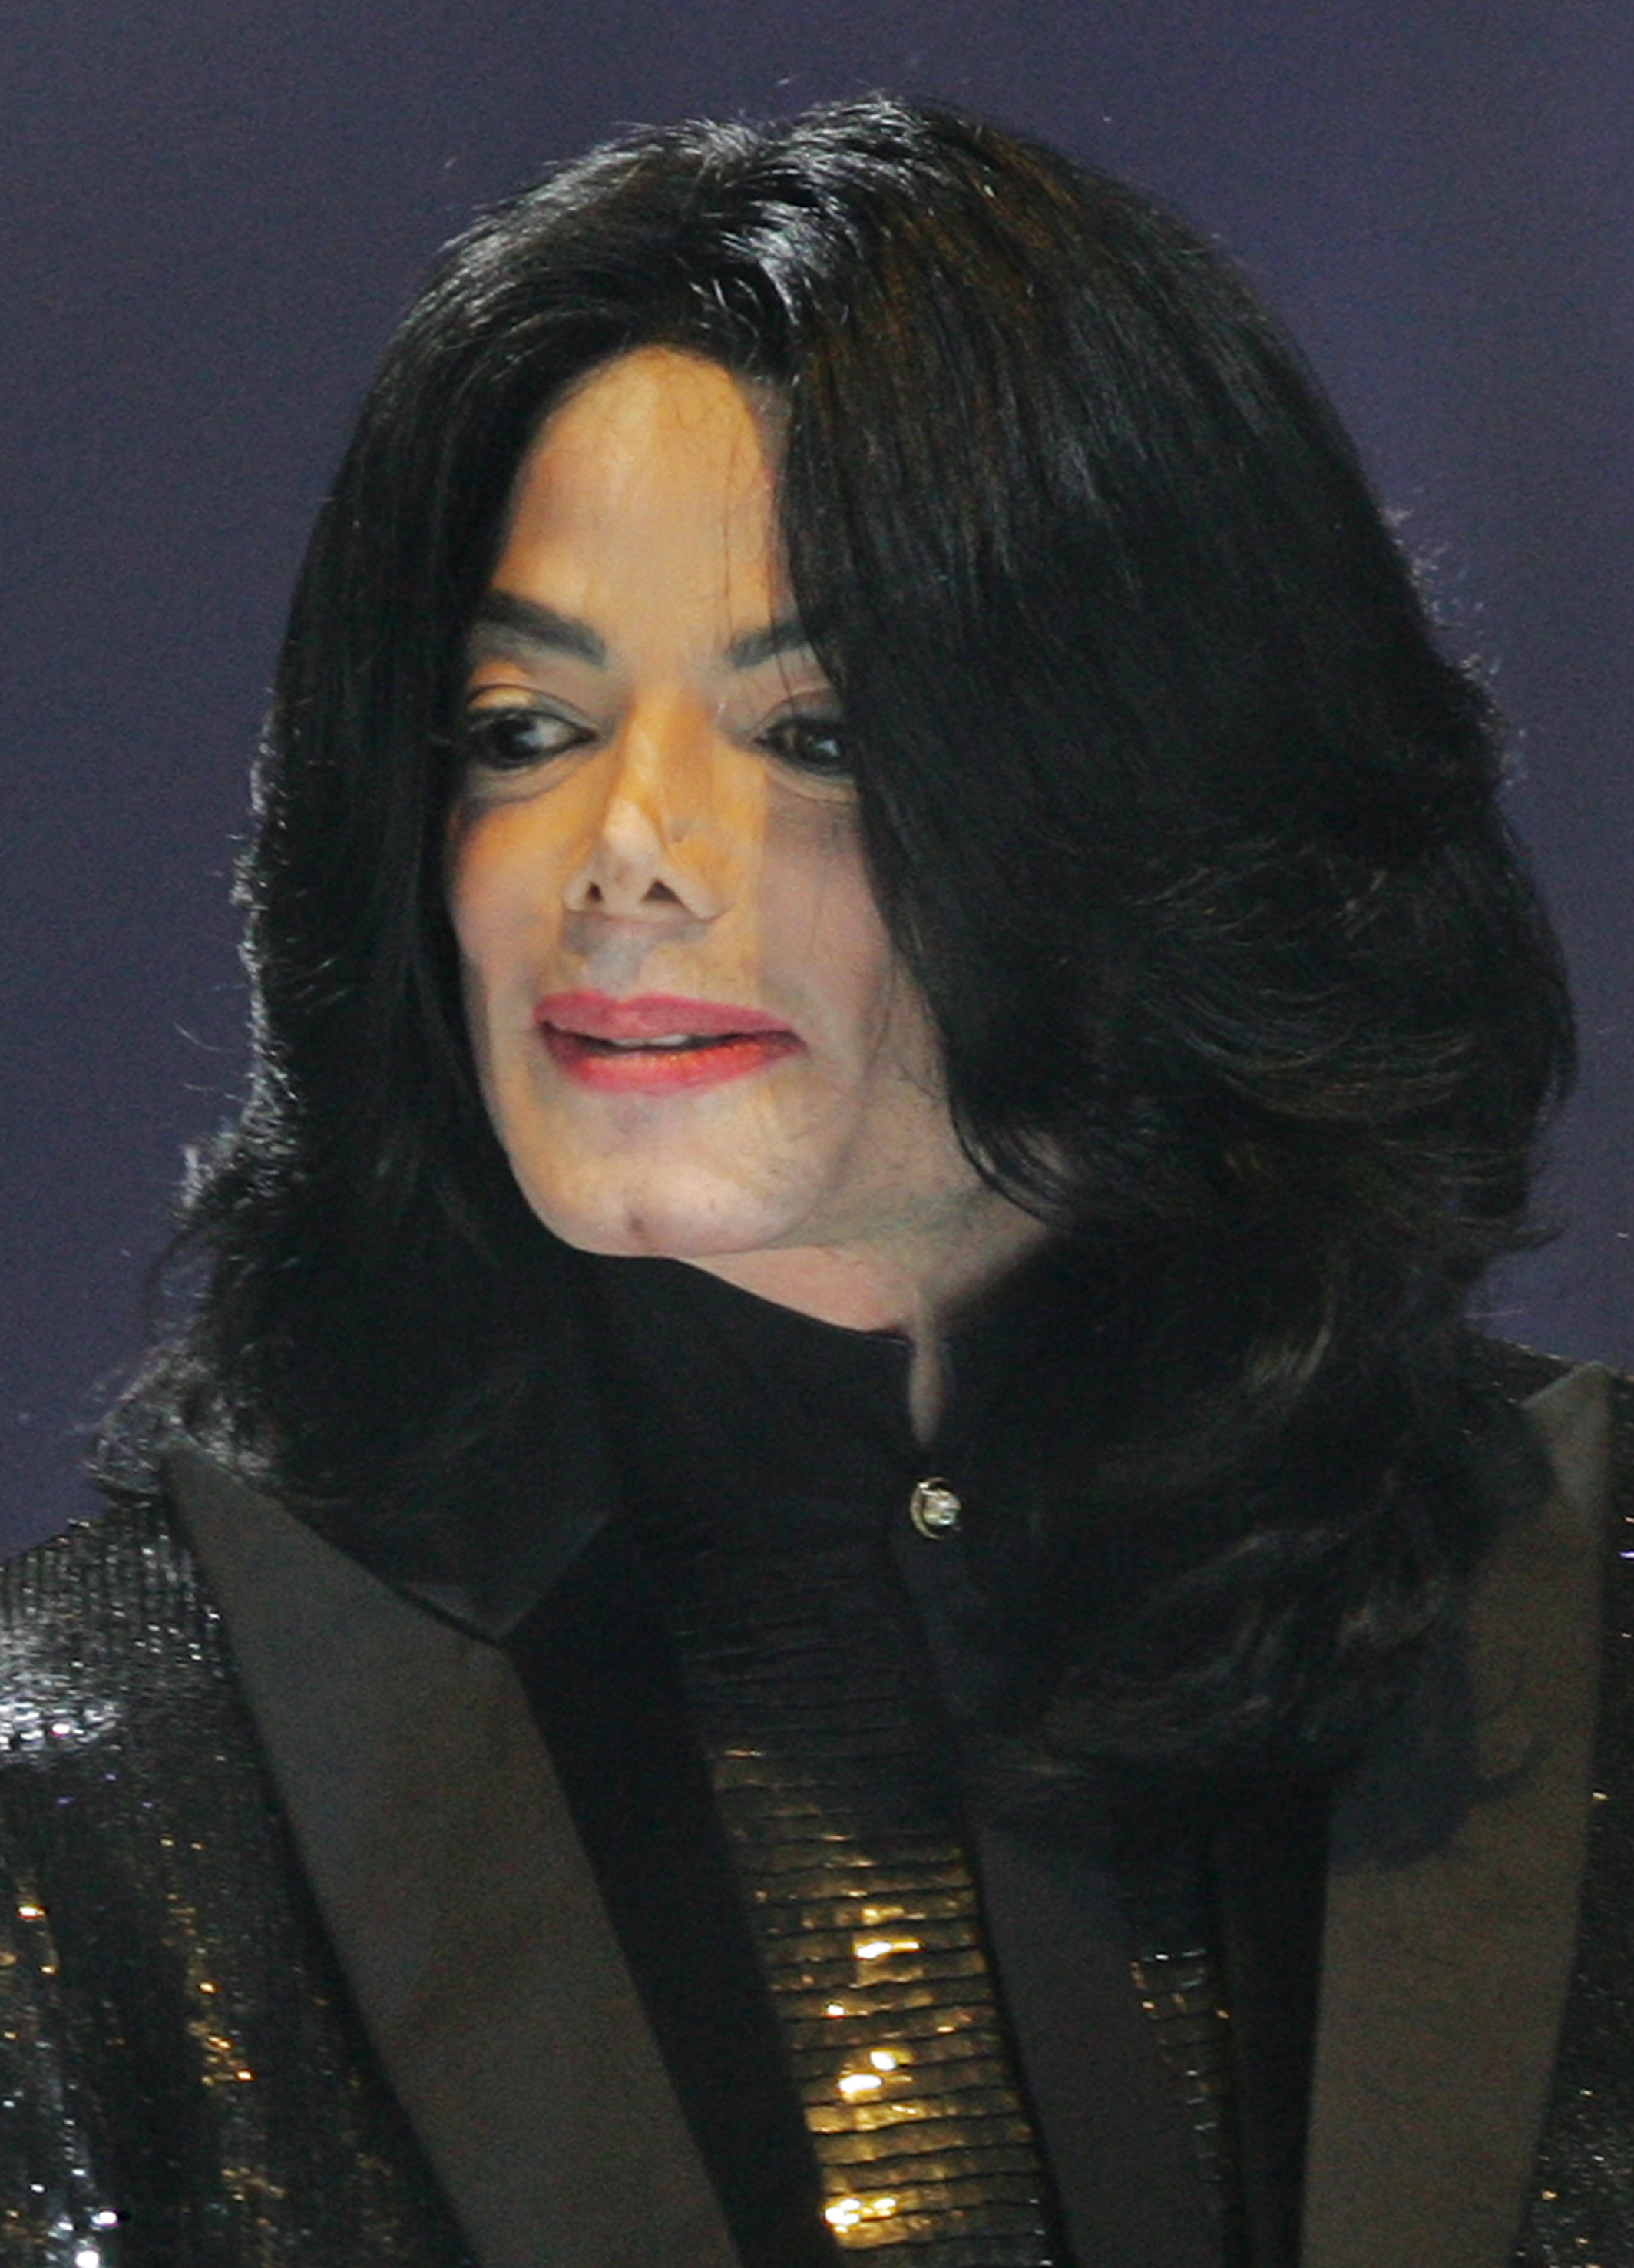 Michael Jackson in 2006 | Source: Getty Images